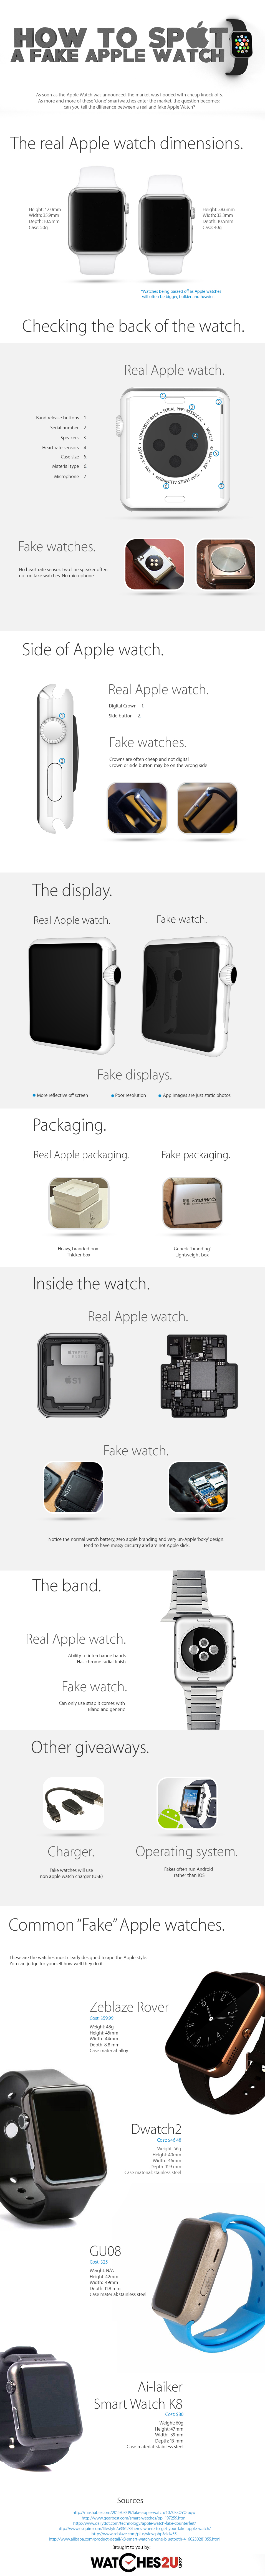 How To Spot A Fake Apple Watch